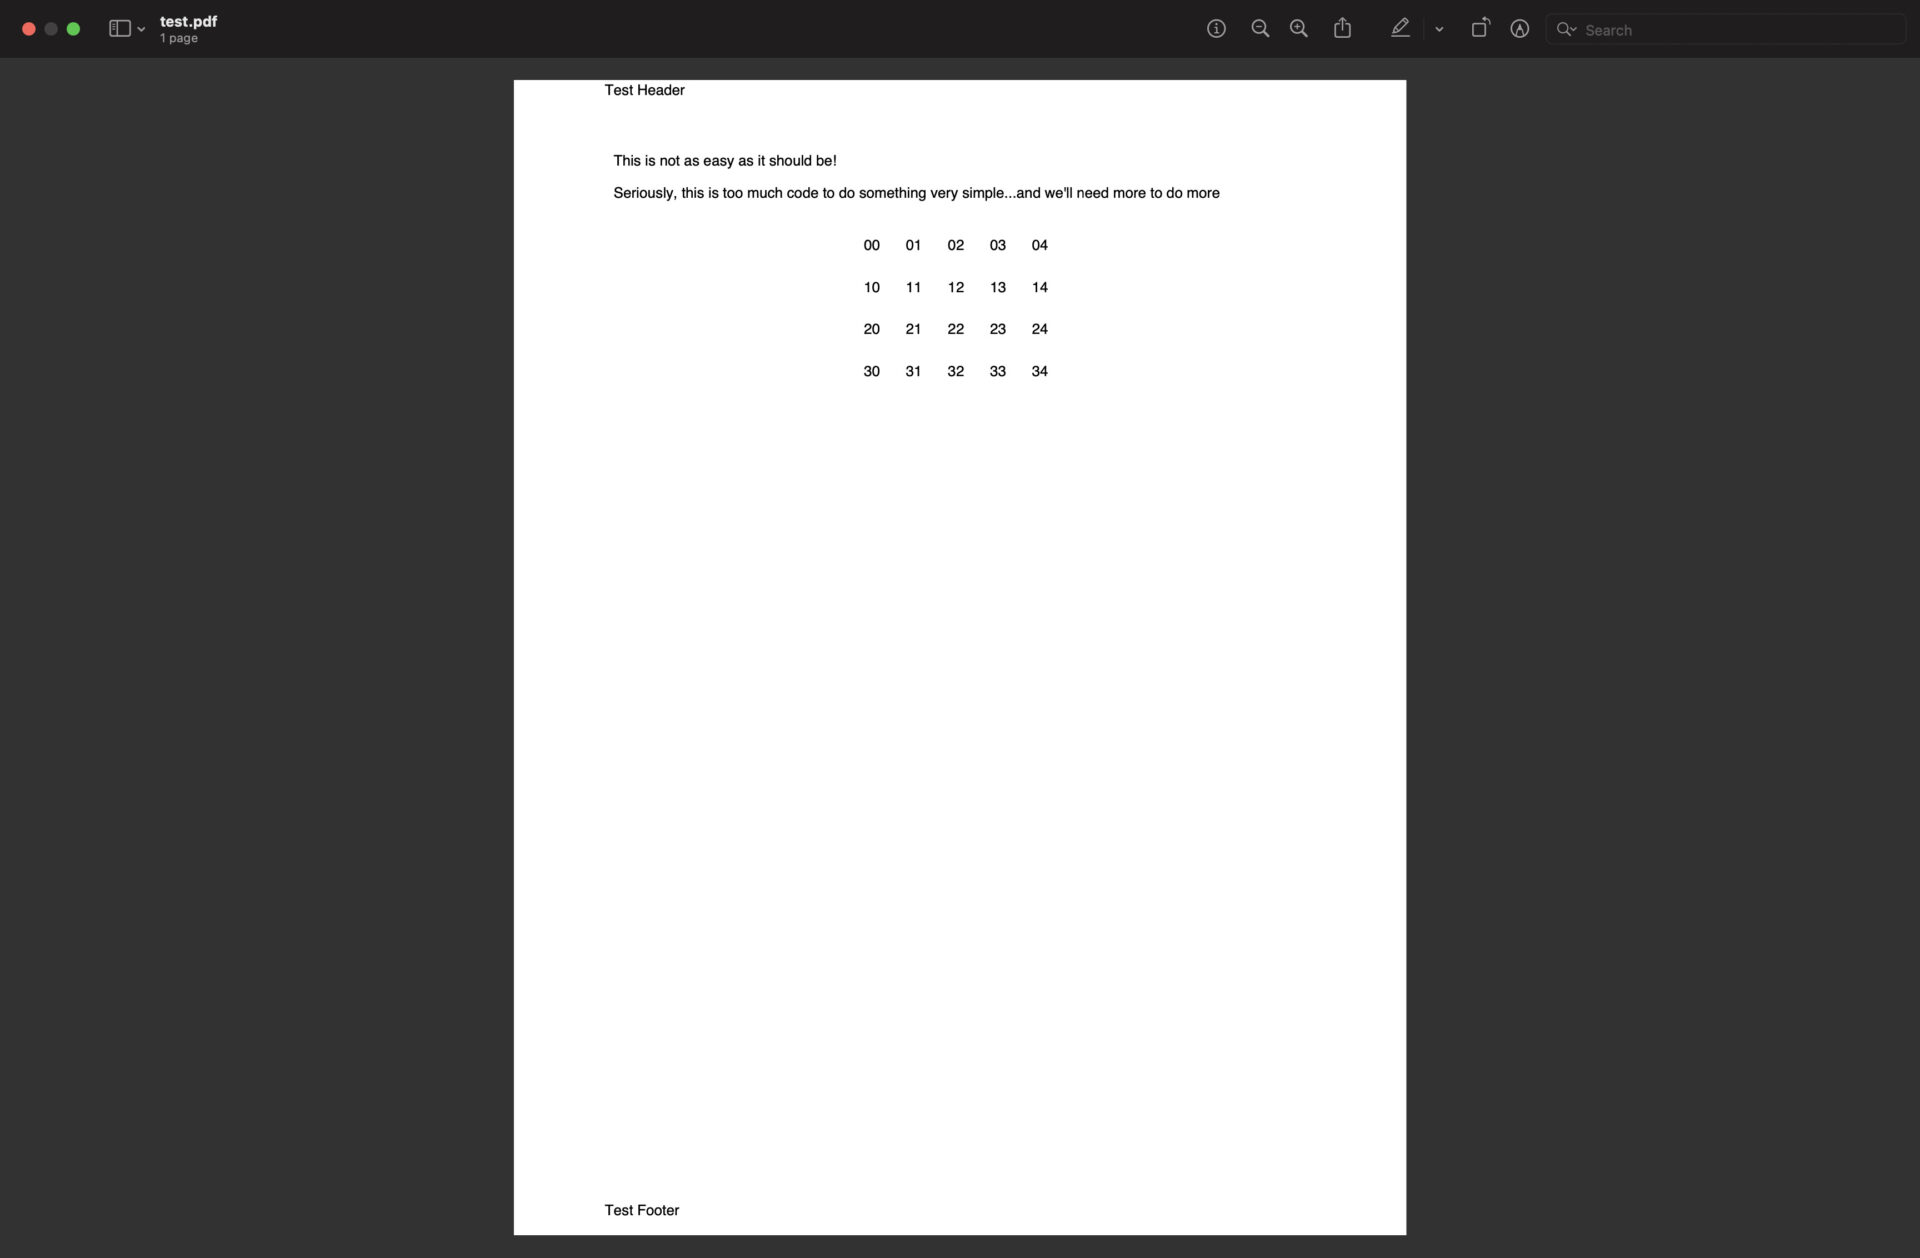 PDF created from Python example